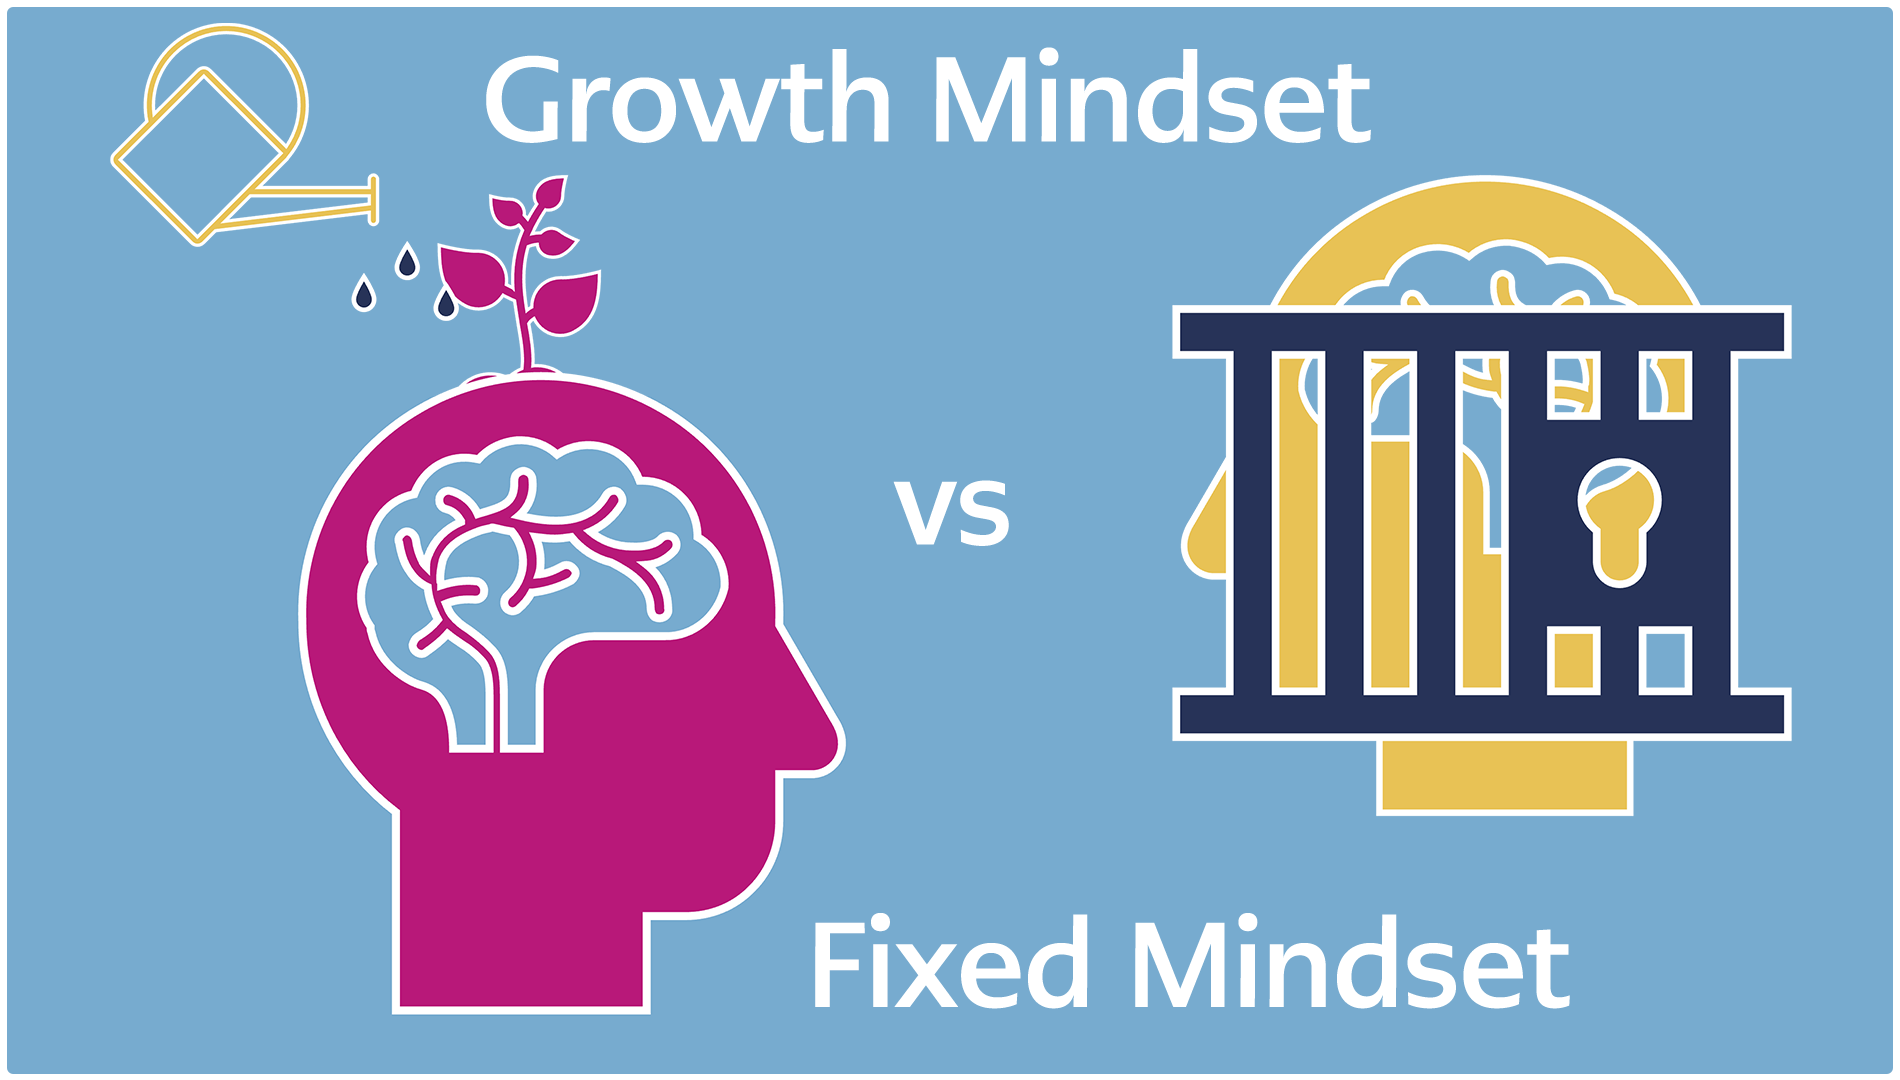 Text reads "Growth Mindset vs Fixed Mindset" With an image of a head with a flower growing out of it, and a head with a lock on it.